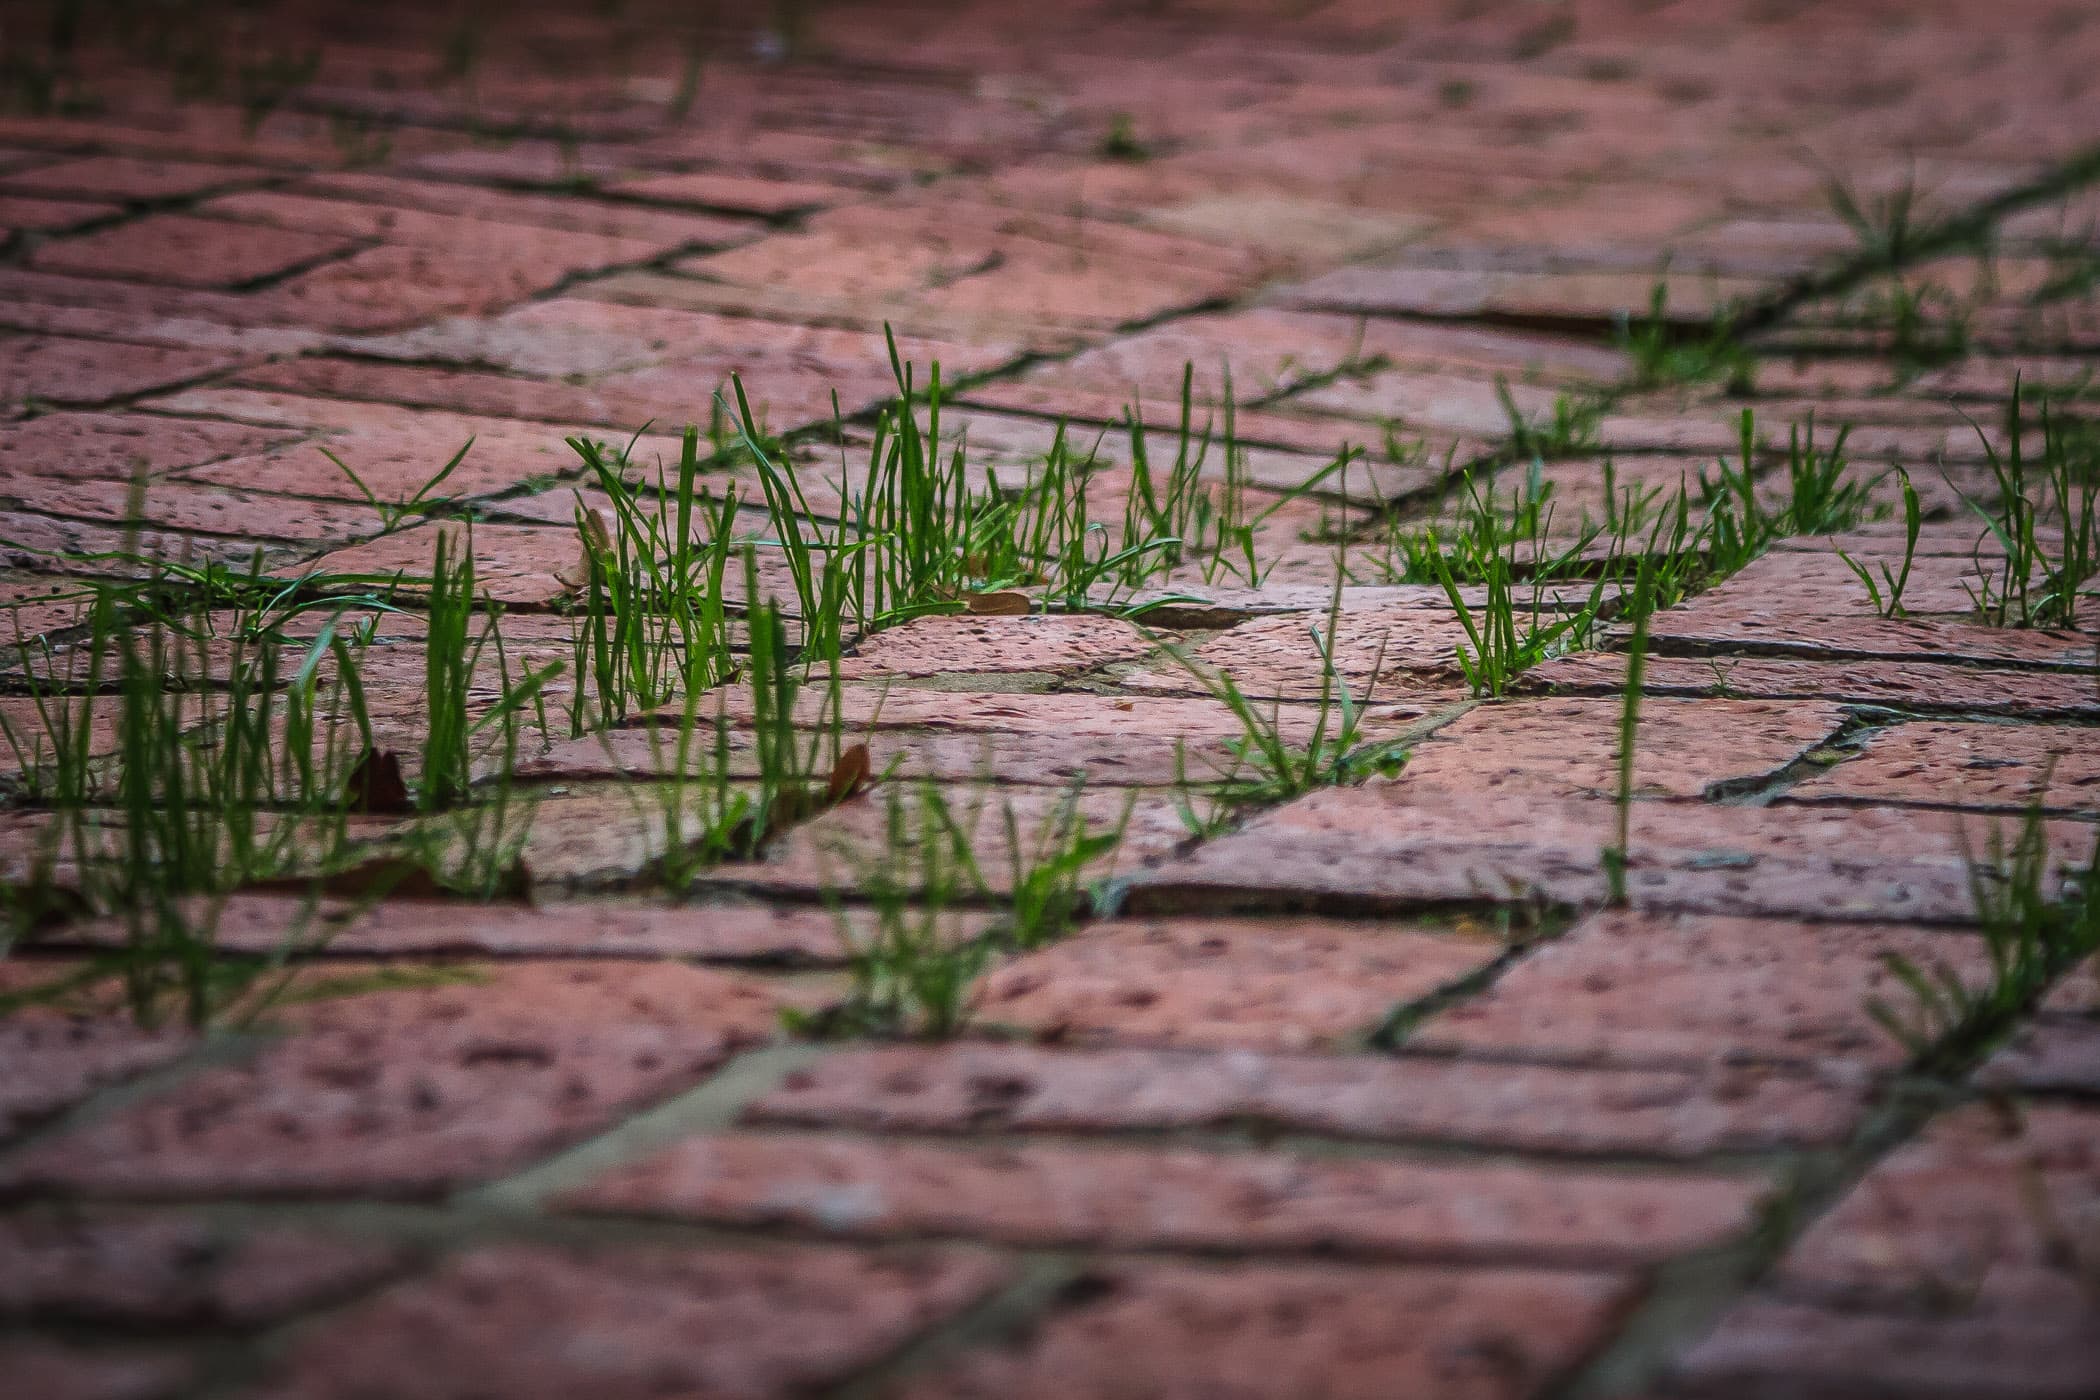 Grass growing in the spaces between bricks, spotted on the campus of Tyler Junior College, Tyler, Texas.